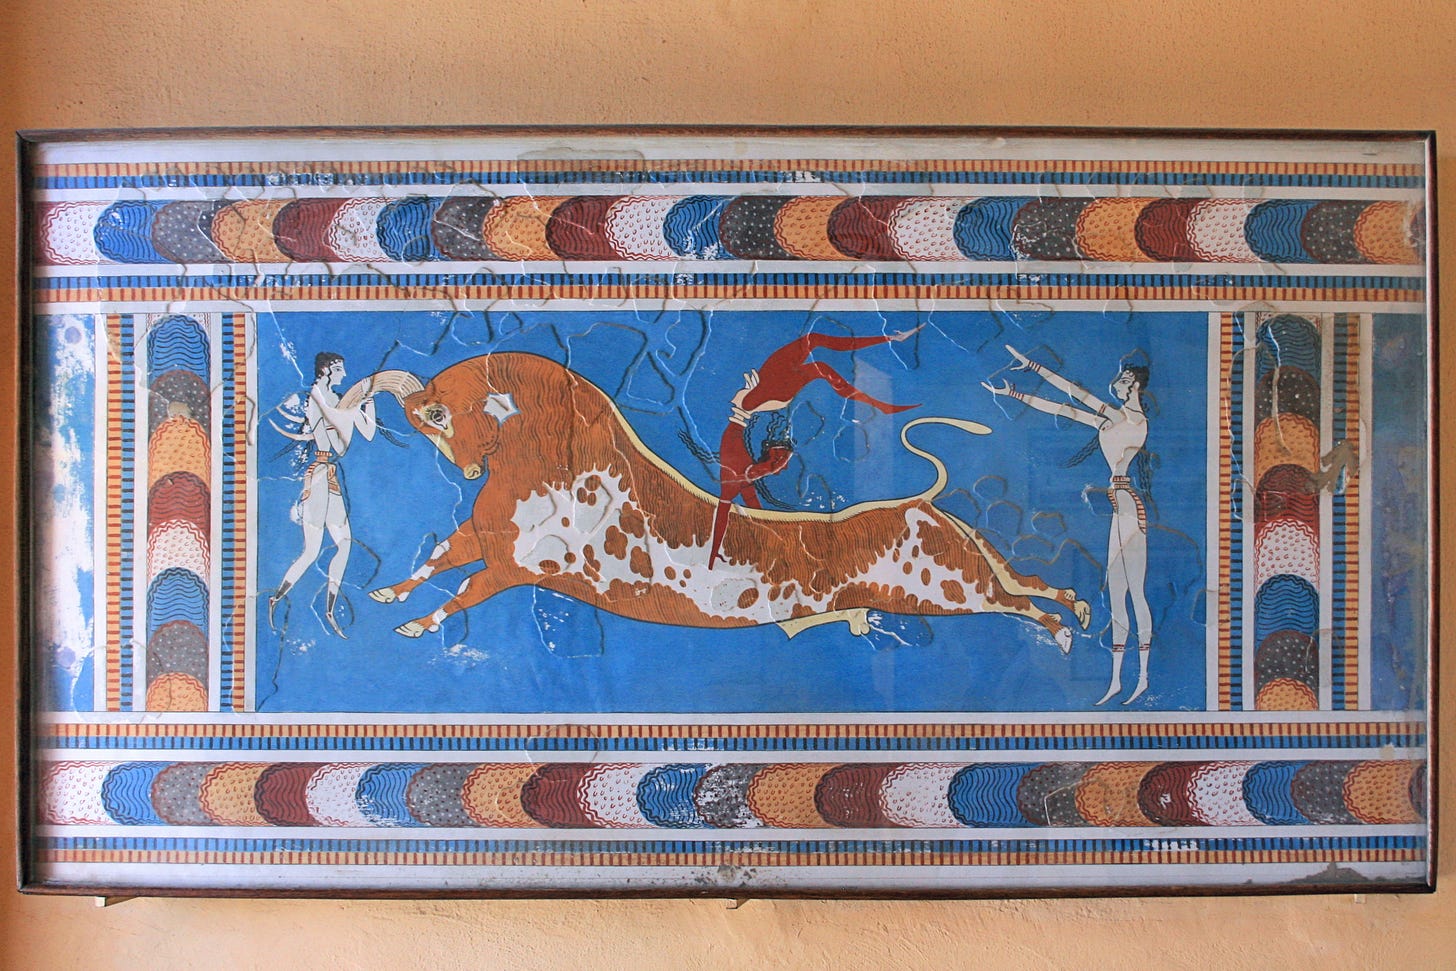 Picture of men leaping over a charging bull depicted on a wall painting from Crete.